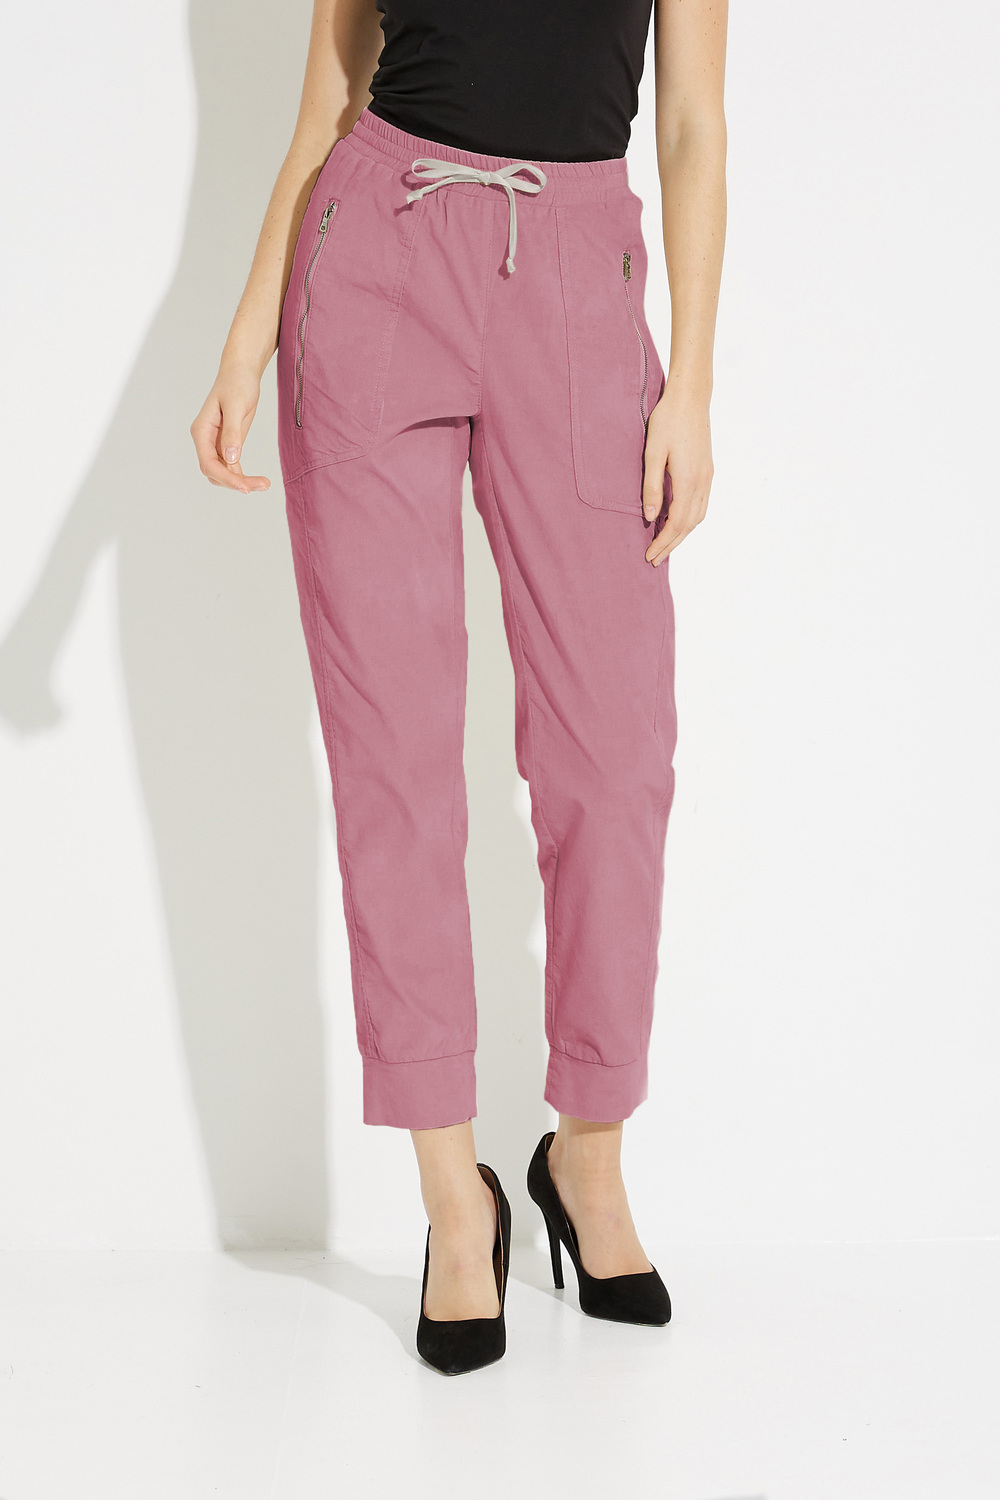 Tapered Drawstring Pant Style EW29142. Dusty Rose